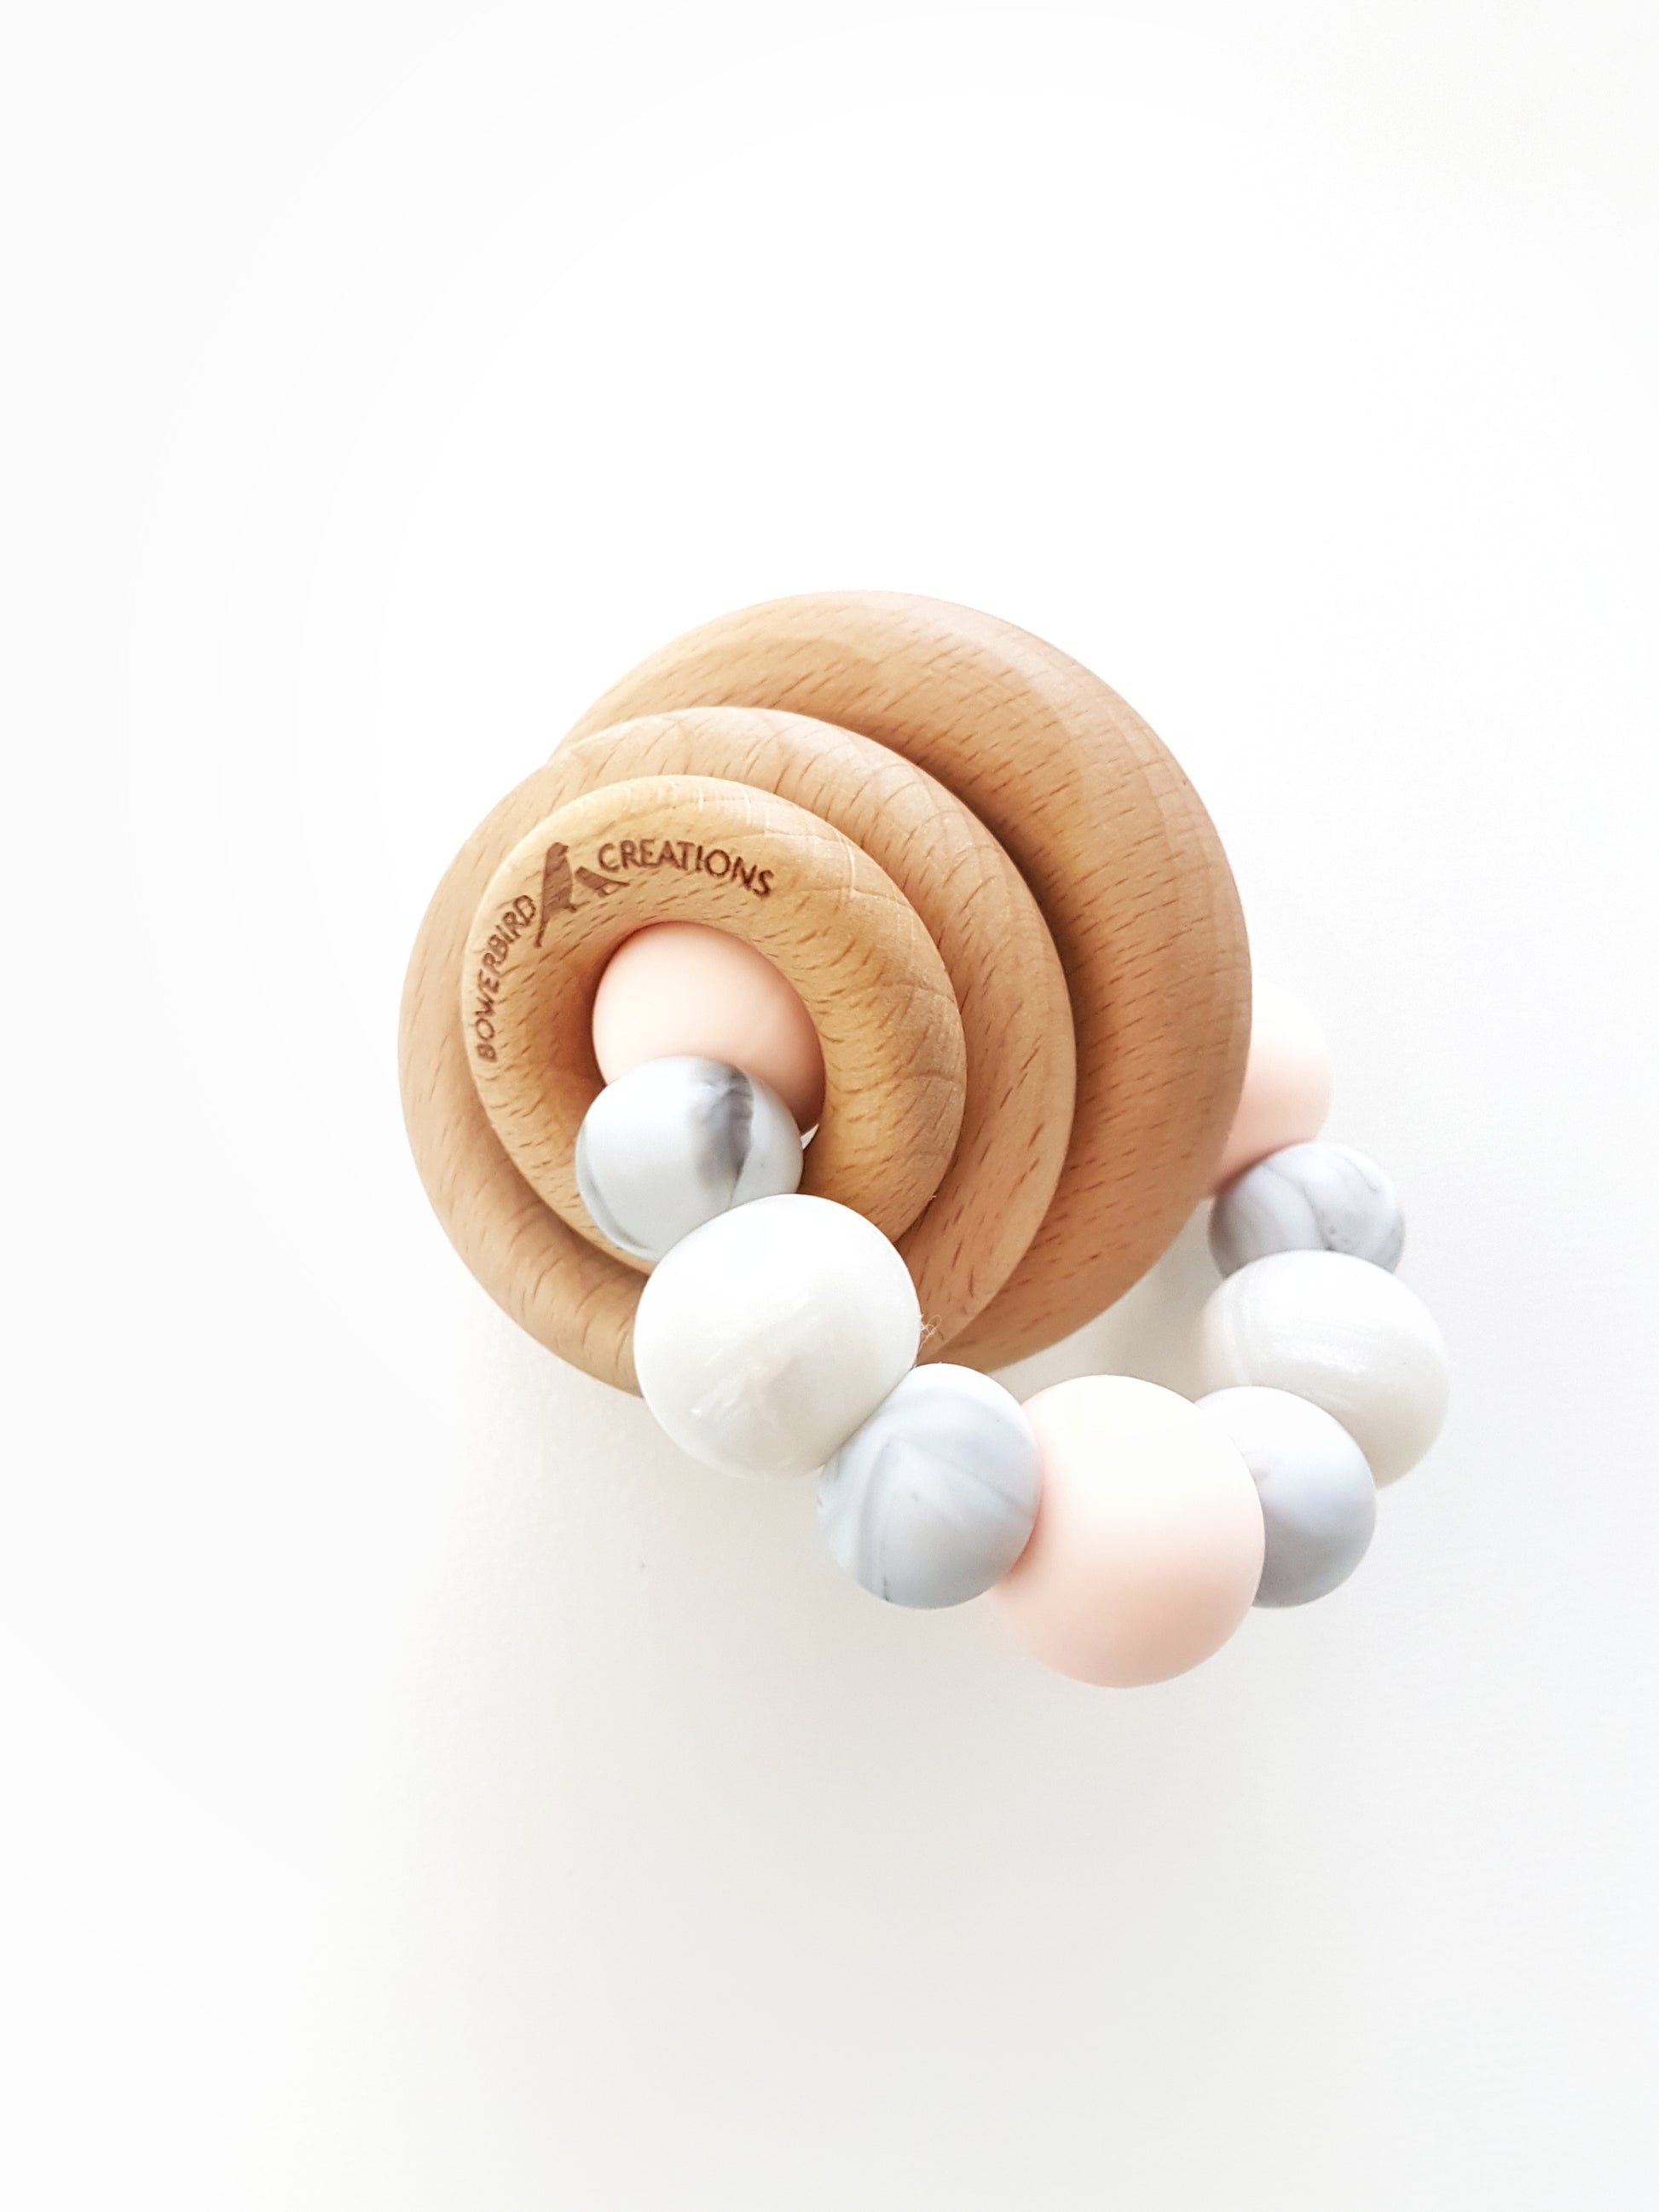 Silicone teething toy for baby with 3 wooden rings. Pink, white, marble.